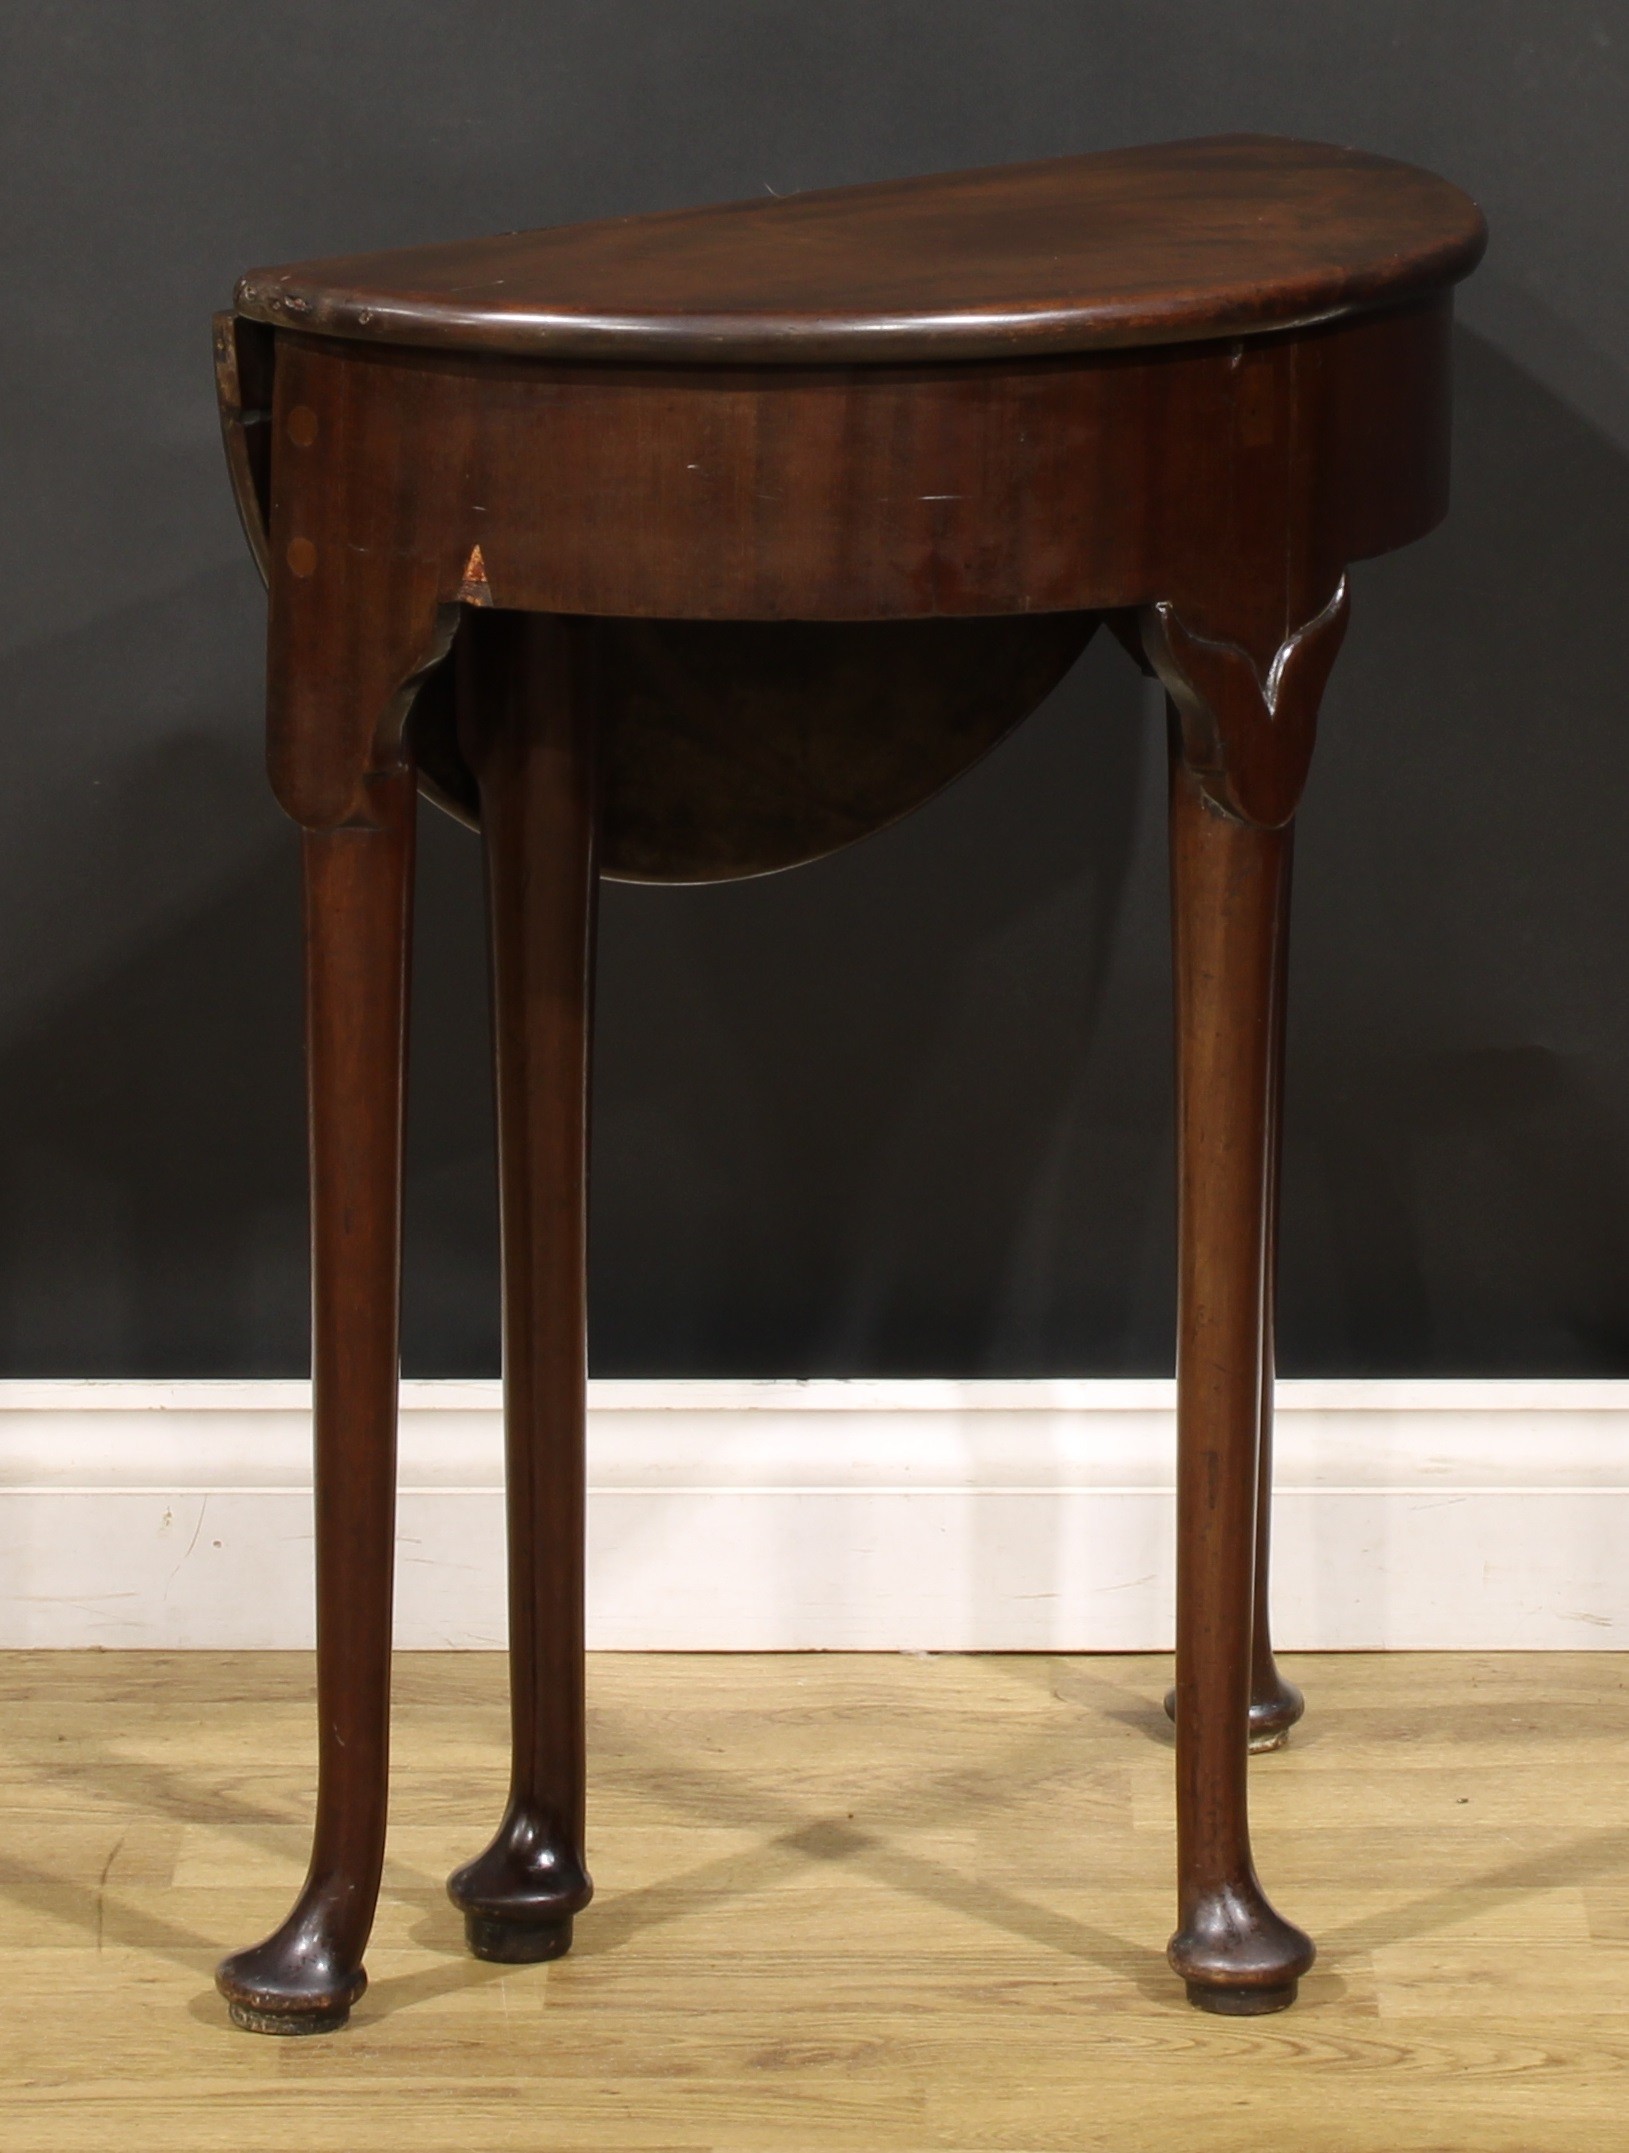 A 19th century mahogany gateleg lamp or occasional table, fall leaf, straightened cabriole legs, pad - Image 4 of 6